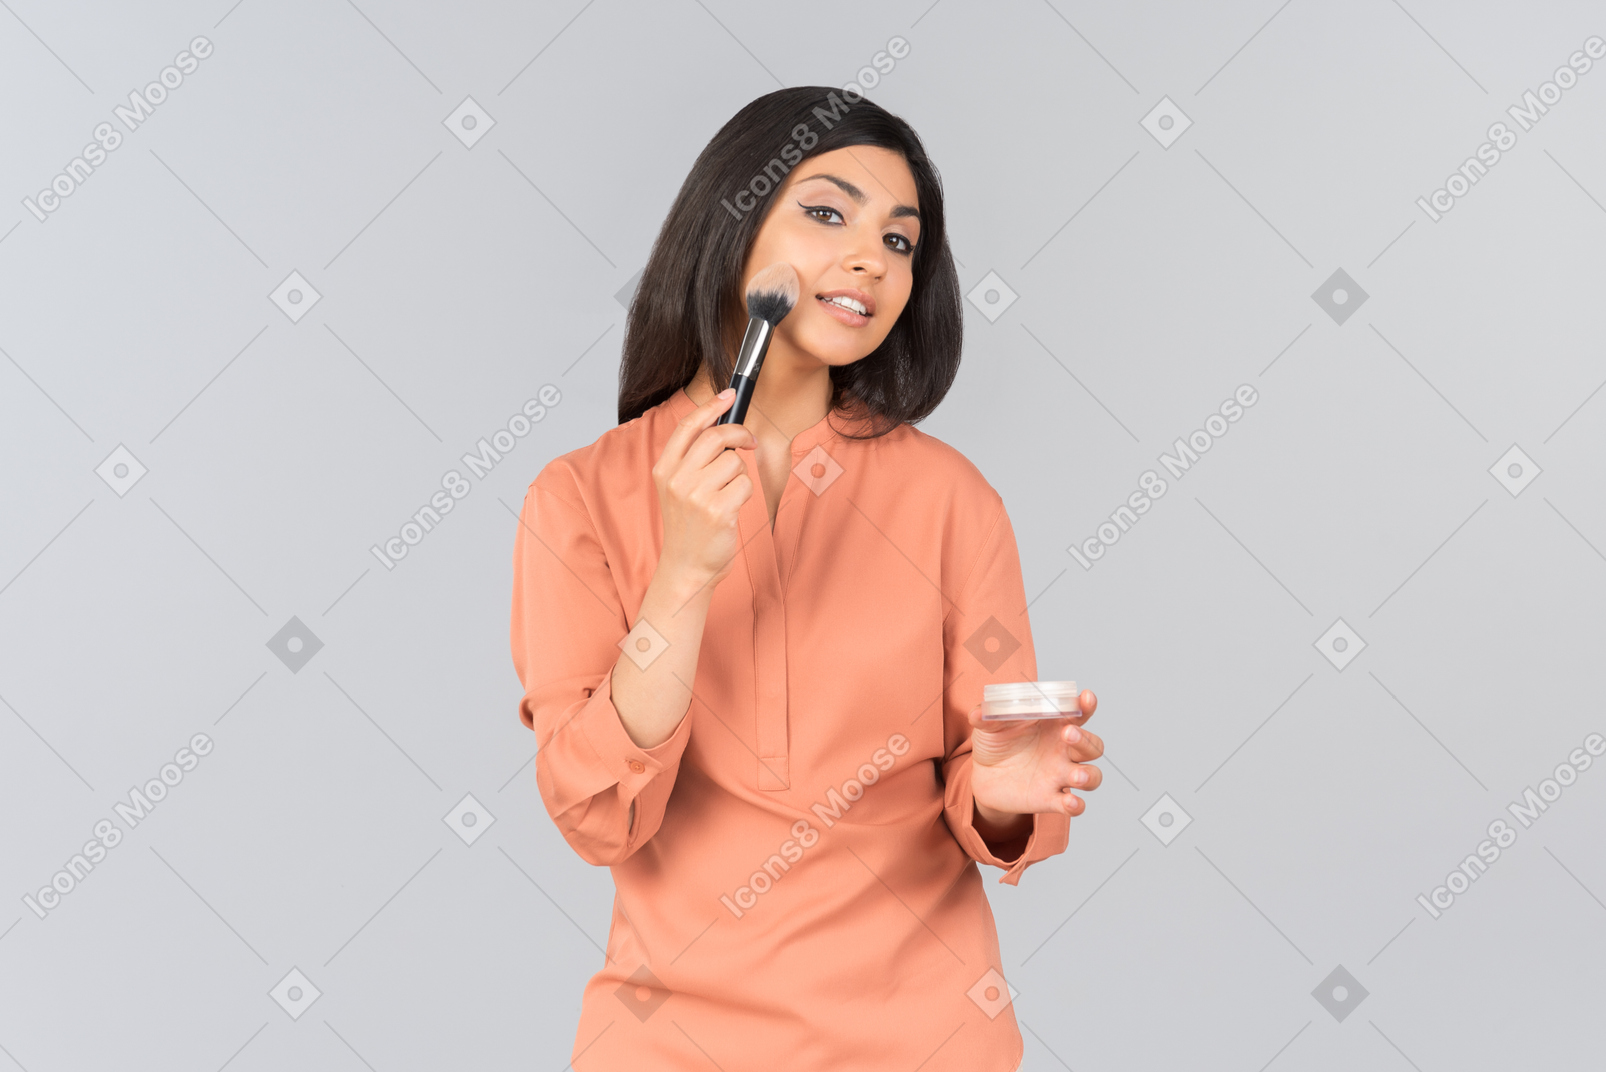 Indian woman applying face powder on her cheeks